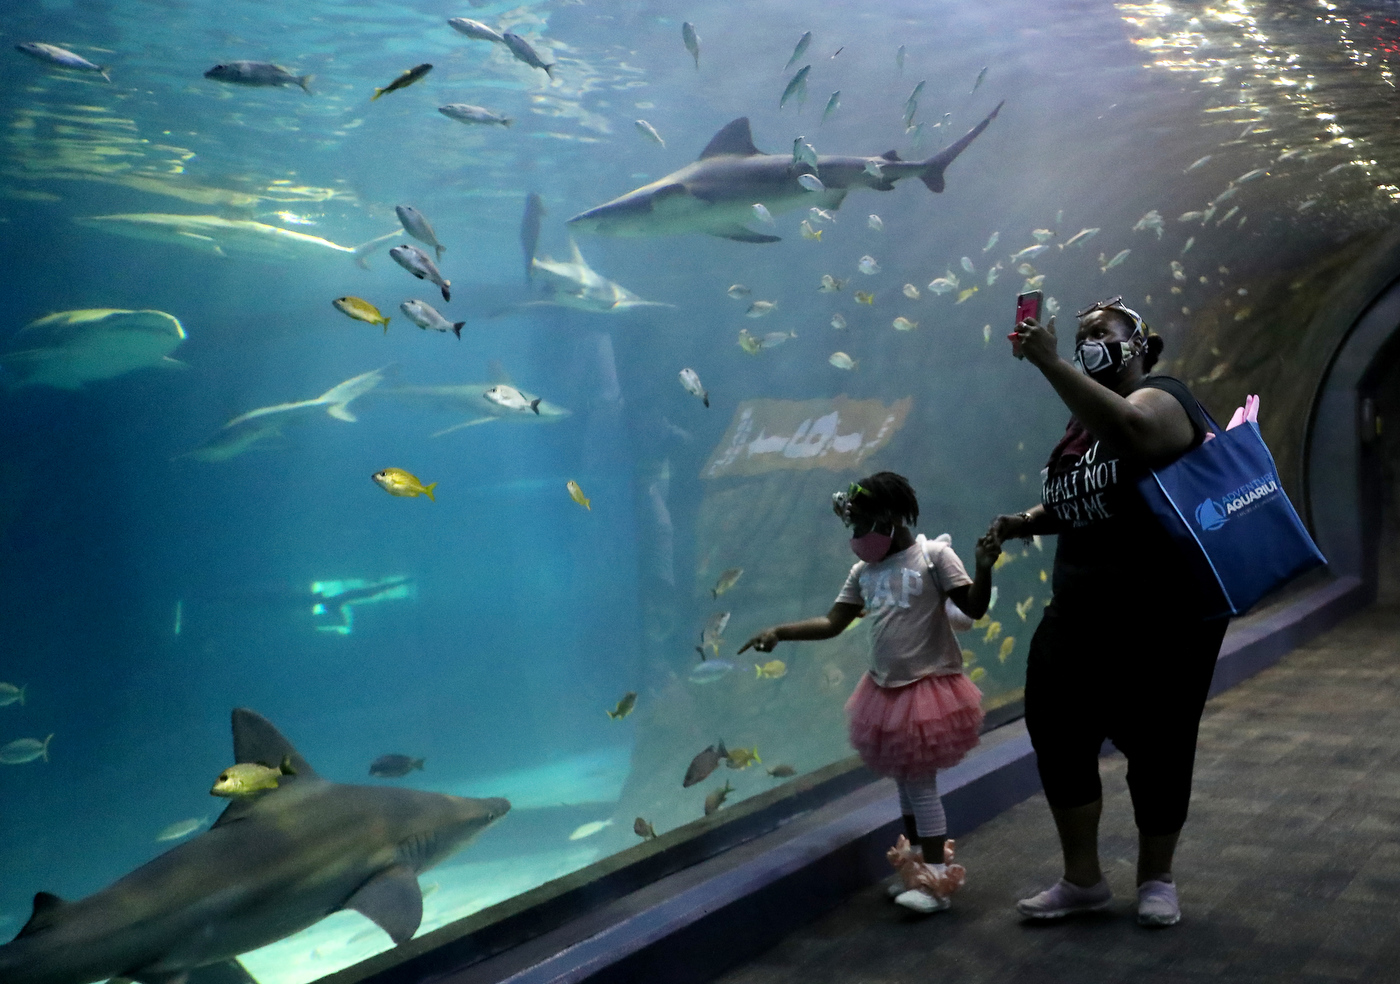 As N.J. aquarium reopens at low capacity, you'll have the sharks all to ... - KTPXPMNWANAIPNKTEZXJAART3A